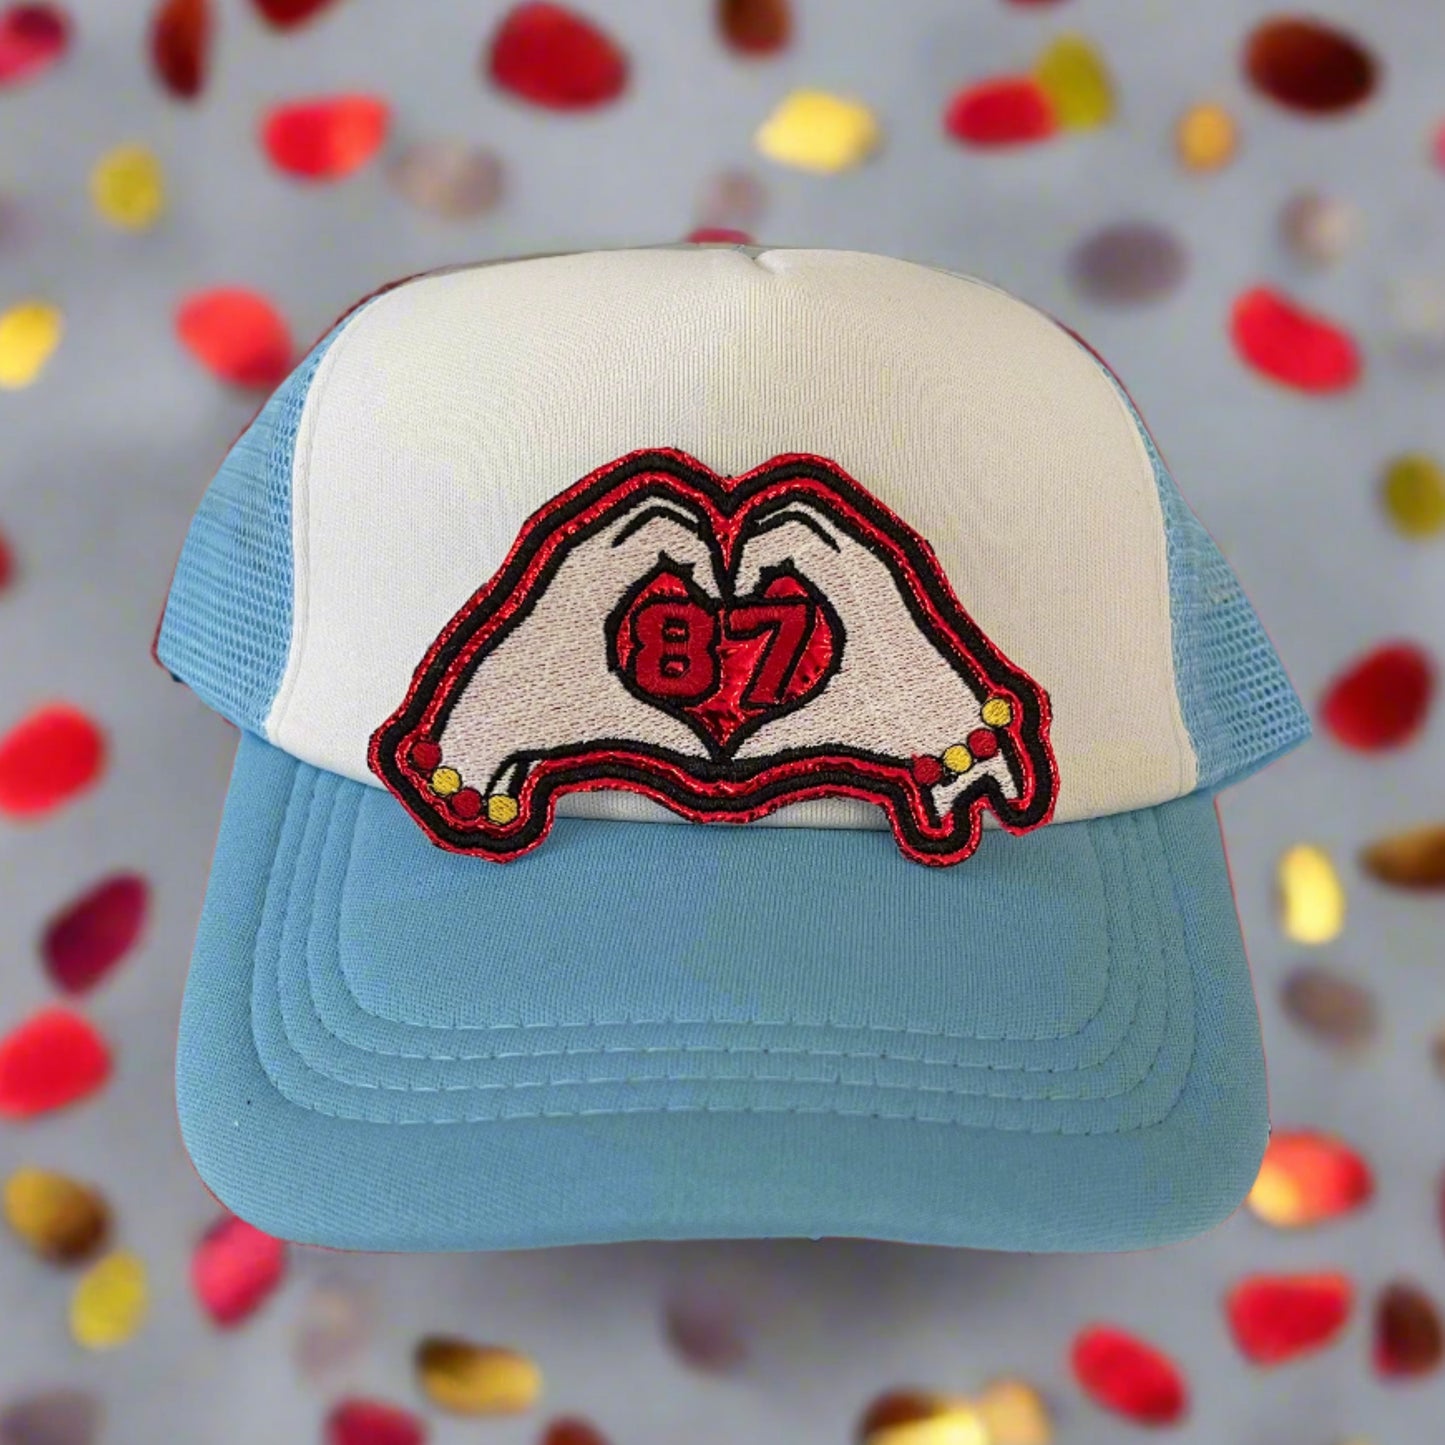 Iron-on patch featuring a heart hands design with the number 87, celebrating Taylor Swift and Travis Kelce, showcasing a stylish and playful aesthetic.